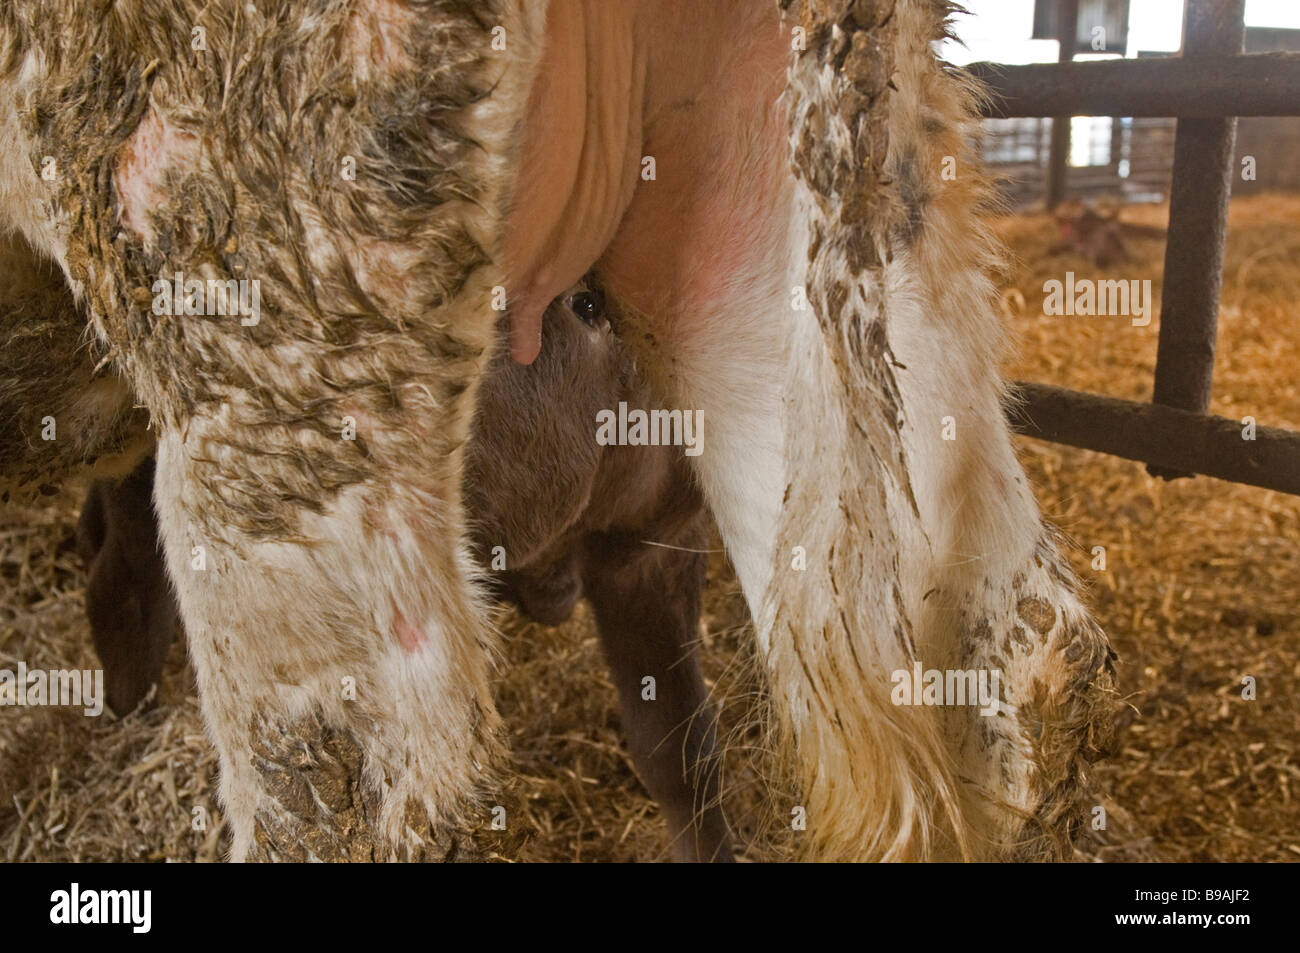 Calf peeping out from underneath its mother's udders Stock Photo